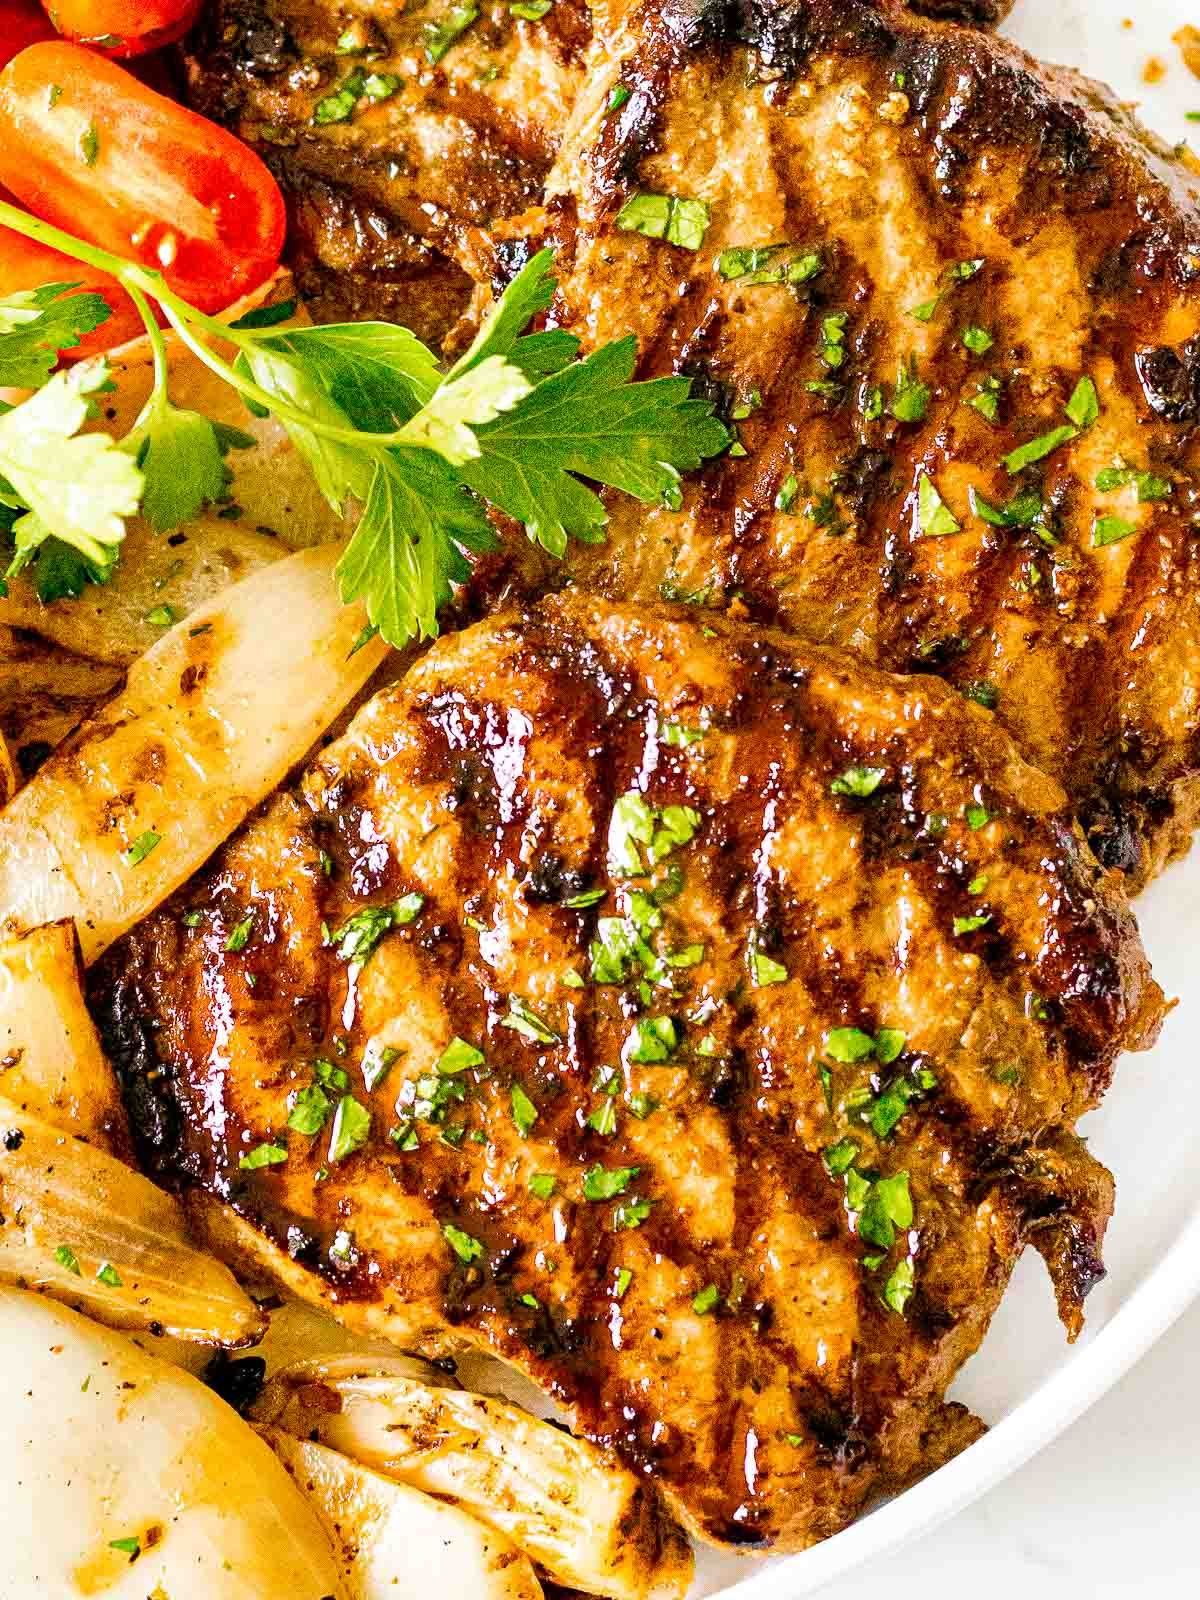 Easy Grilled Pork Chops with Savory Marinade